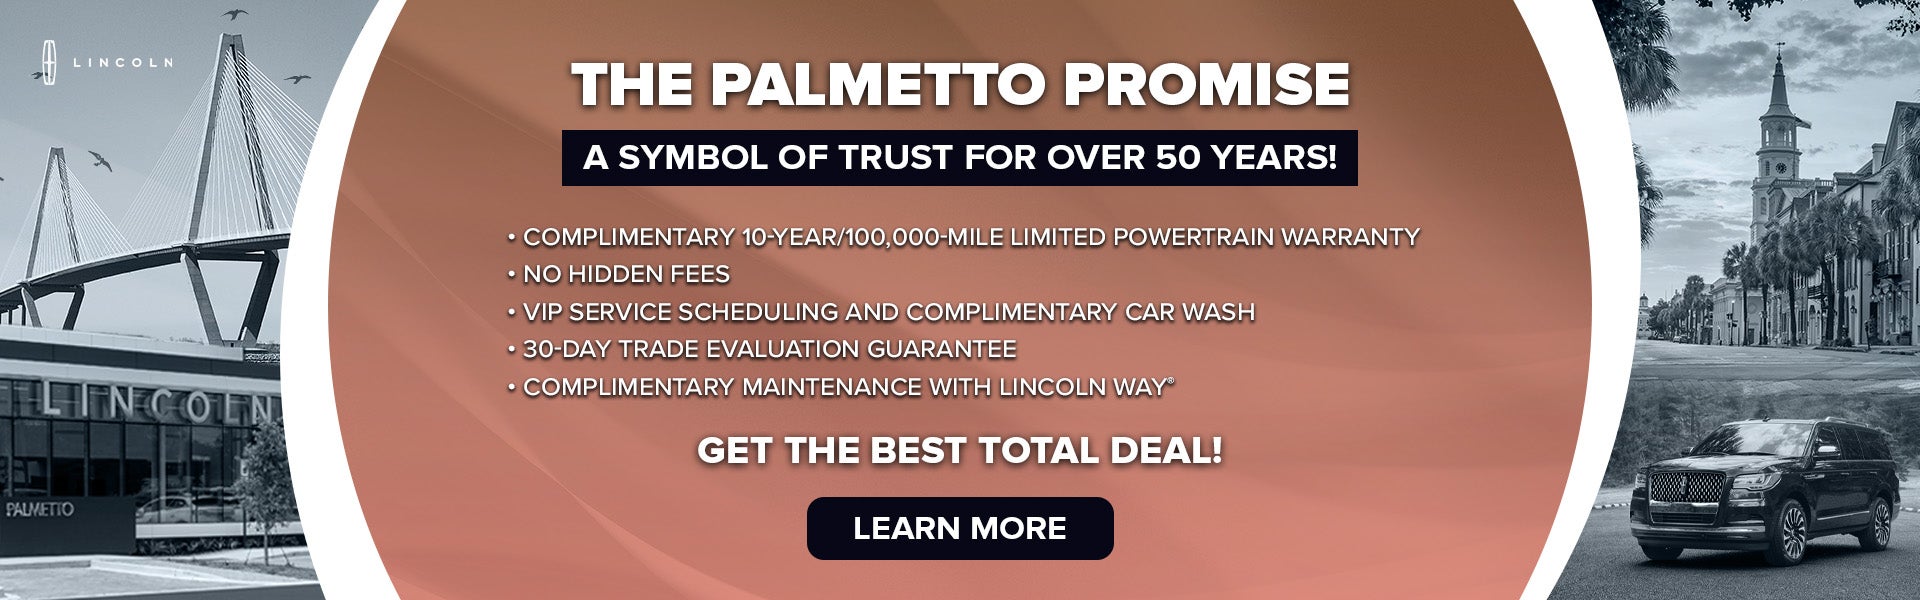 LEARN MORE ABOUT THE PALMETTO PROMISE